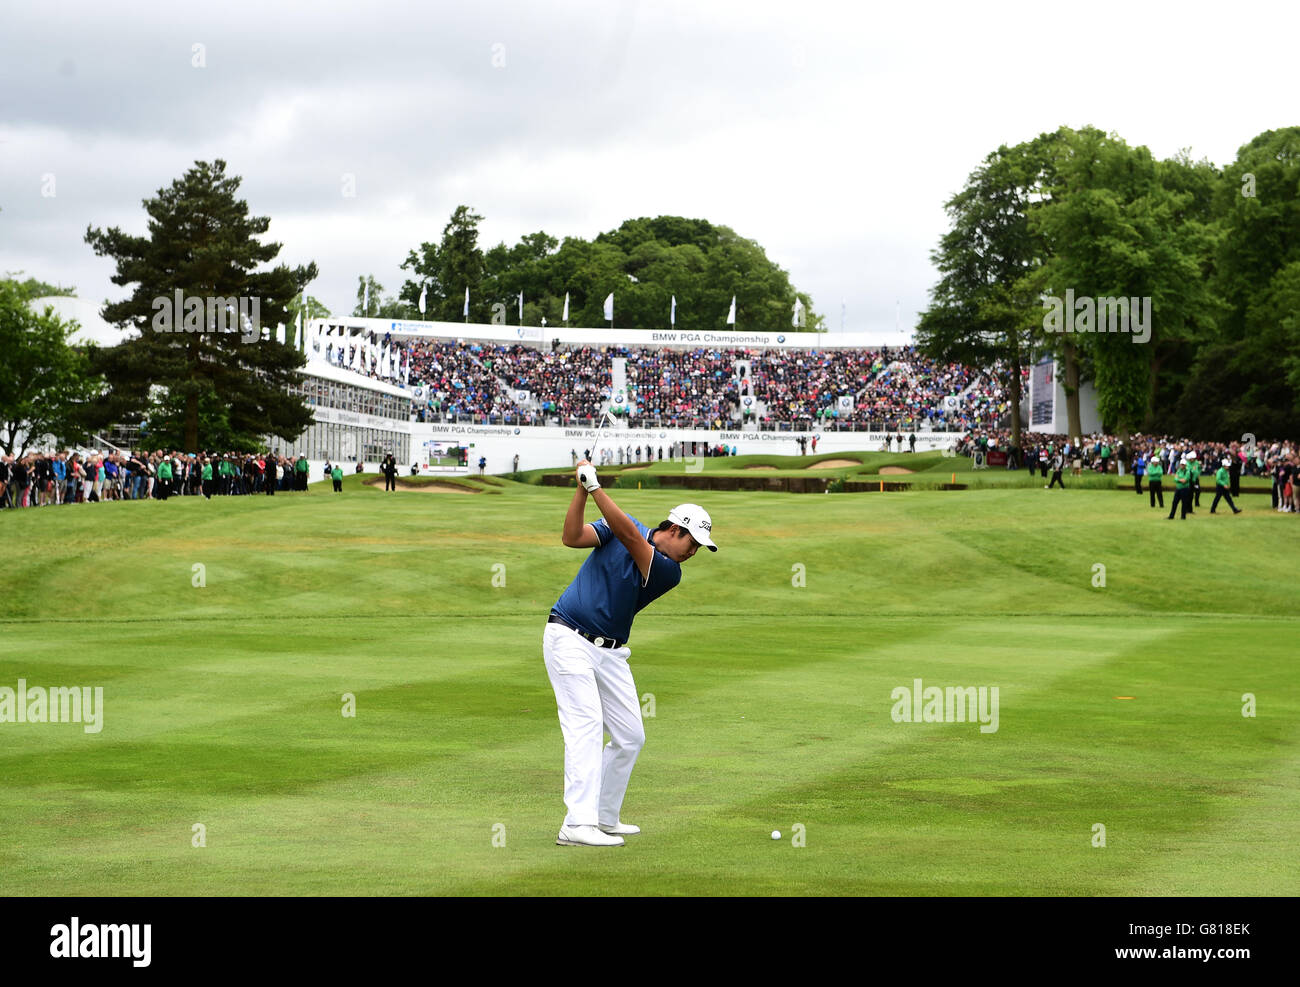 Korea's Byeong Hun An plays on to the 18th green during day four of the 2015 BMW PGA Championship at the Wentworth Golf Club, Surrey. Stock Photo